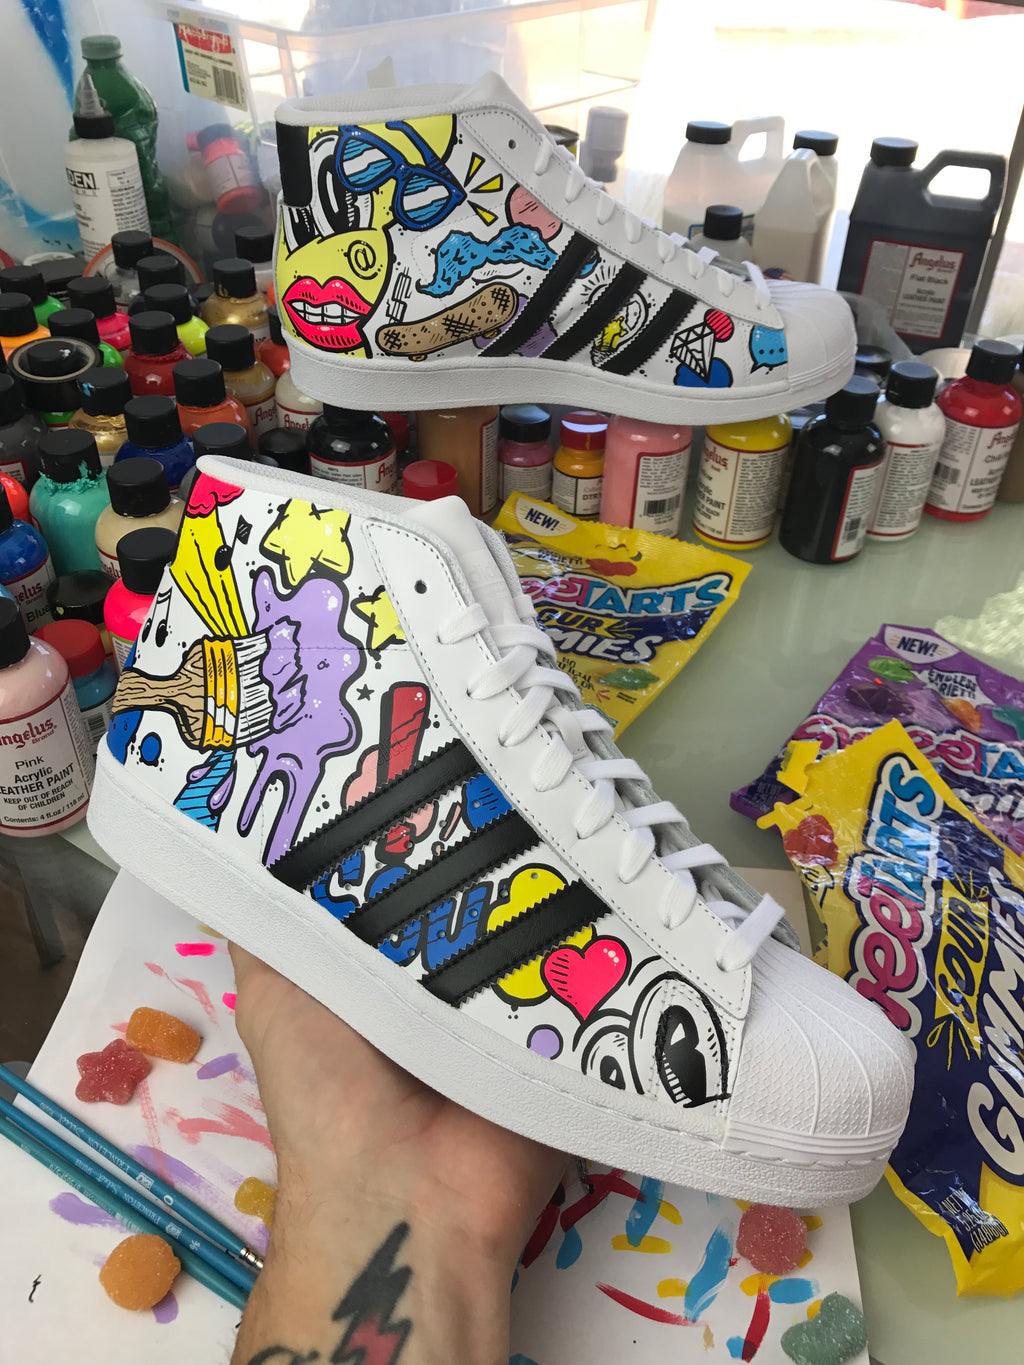 Cant Stop - Adidas Superstar shoes – chadcantcolor